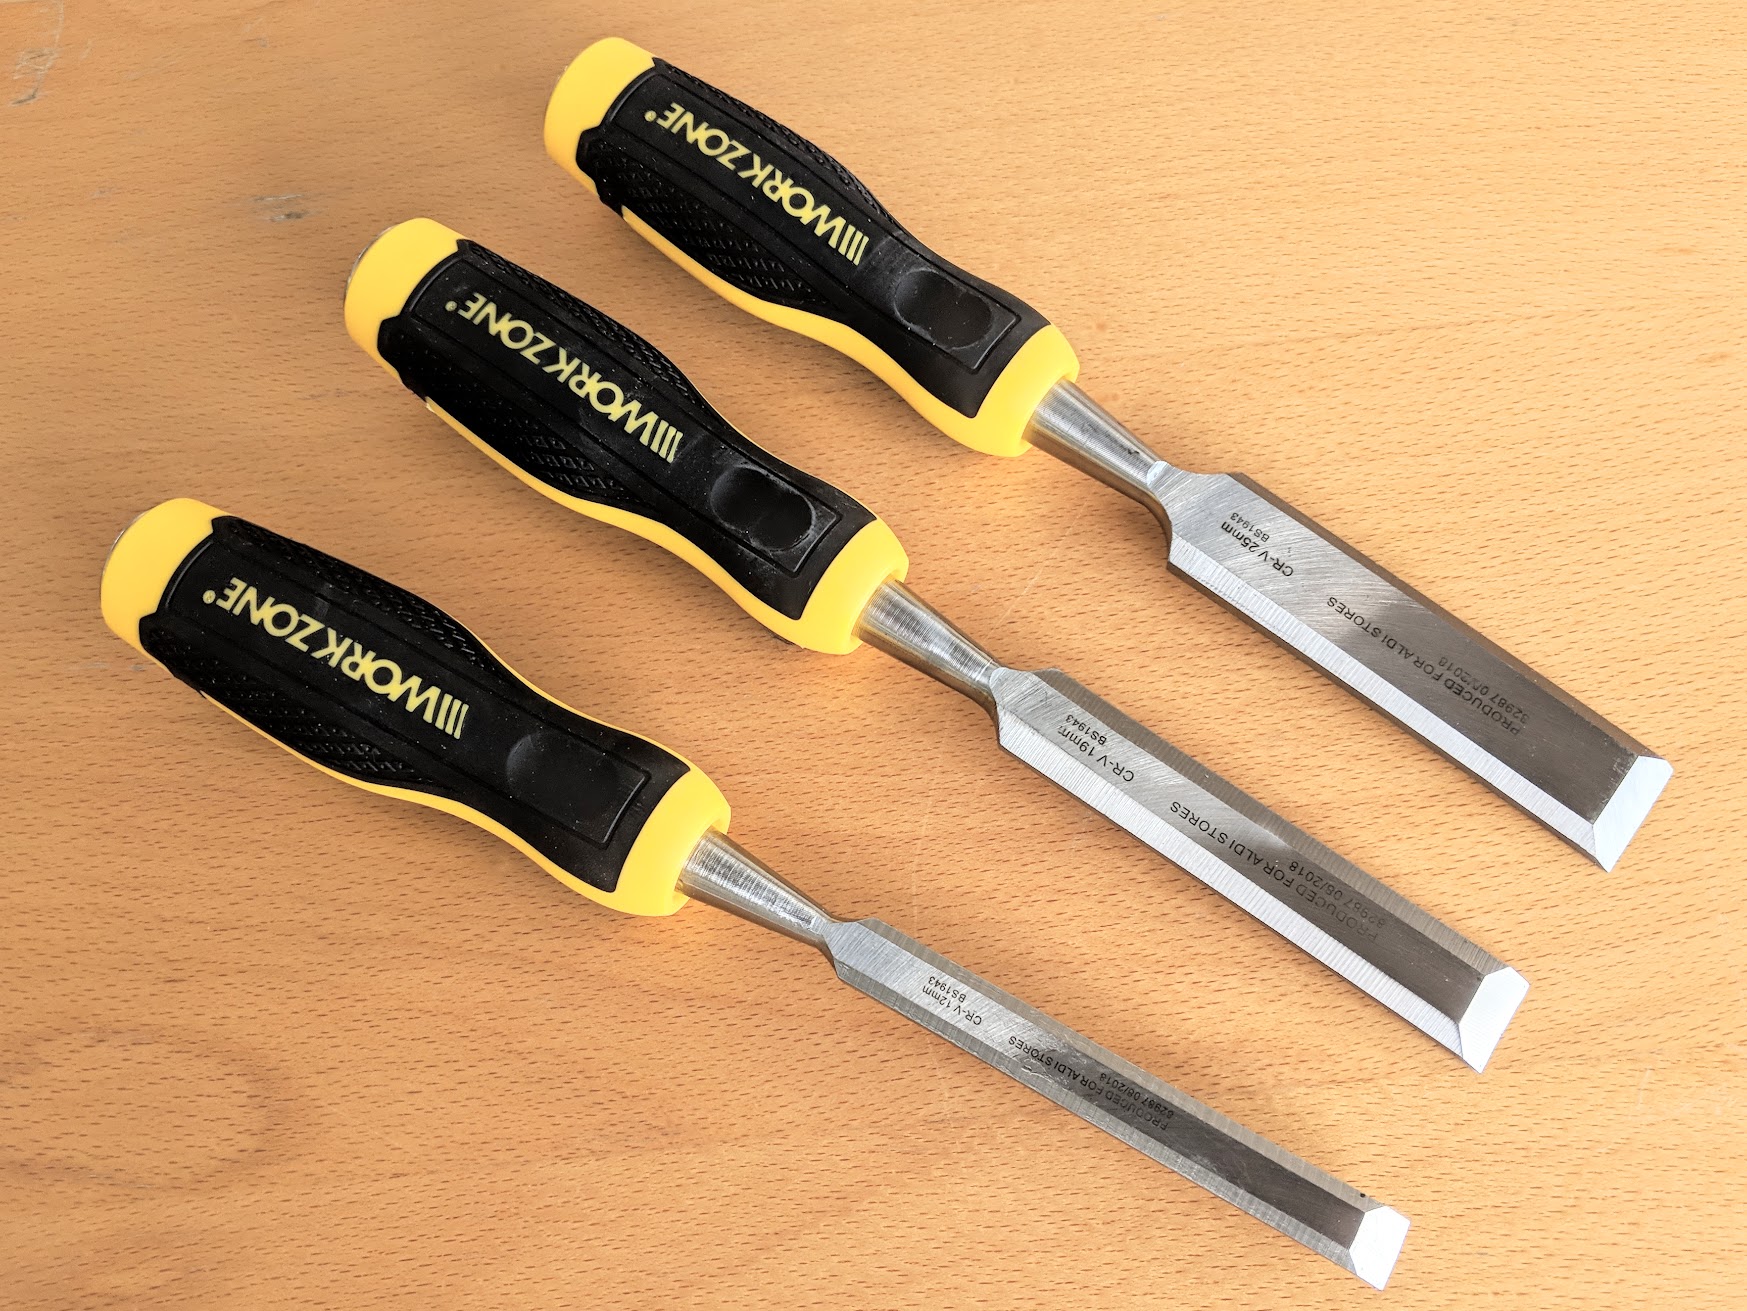 Buying good tools cheap - Starter Chisels UK - Paul Sellers' Blog